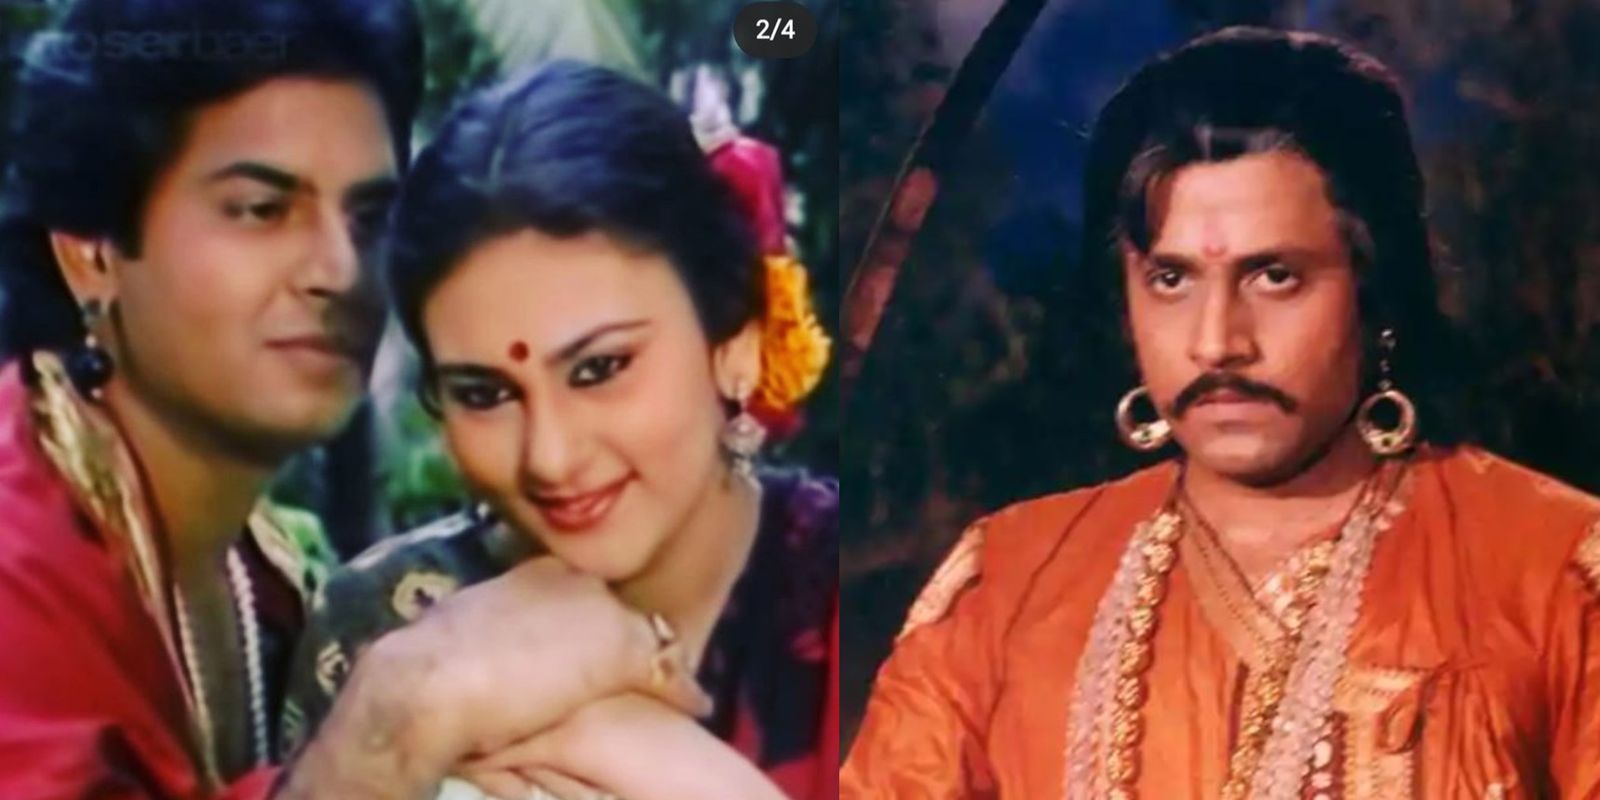 When Ramayan’s Laxman And Sita, Sunil Lahri -Dipika Chikhlia Romanced Each Other On-Screen, Ram Arun Govil Was Also A Part